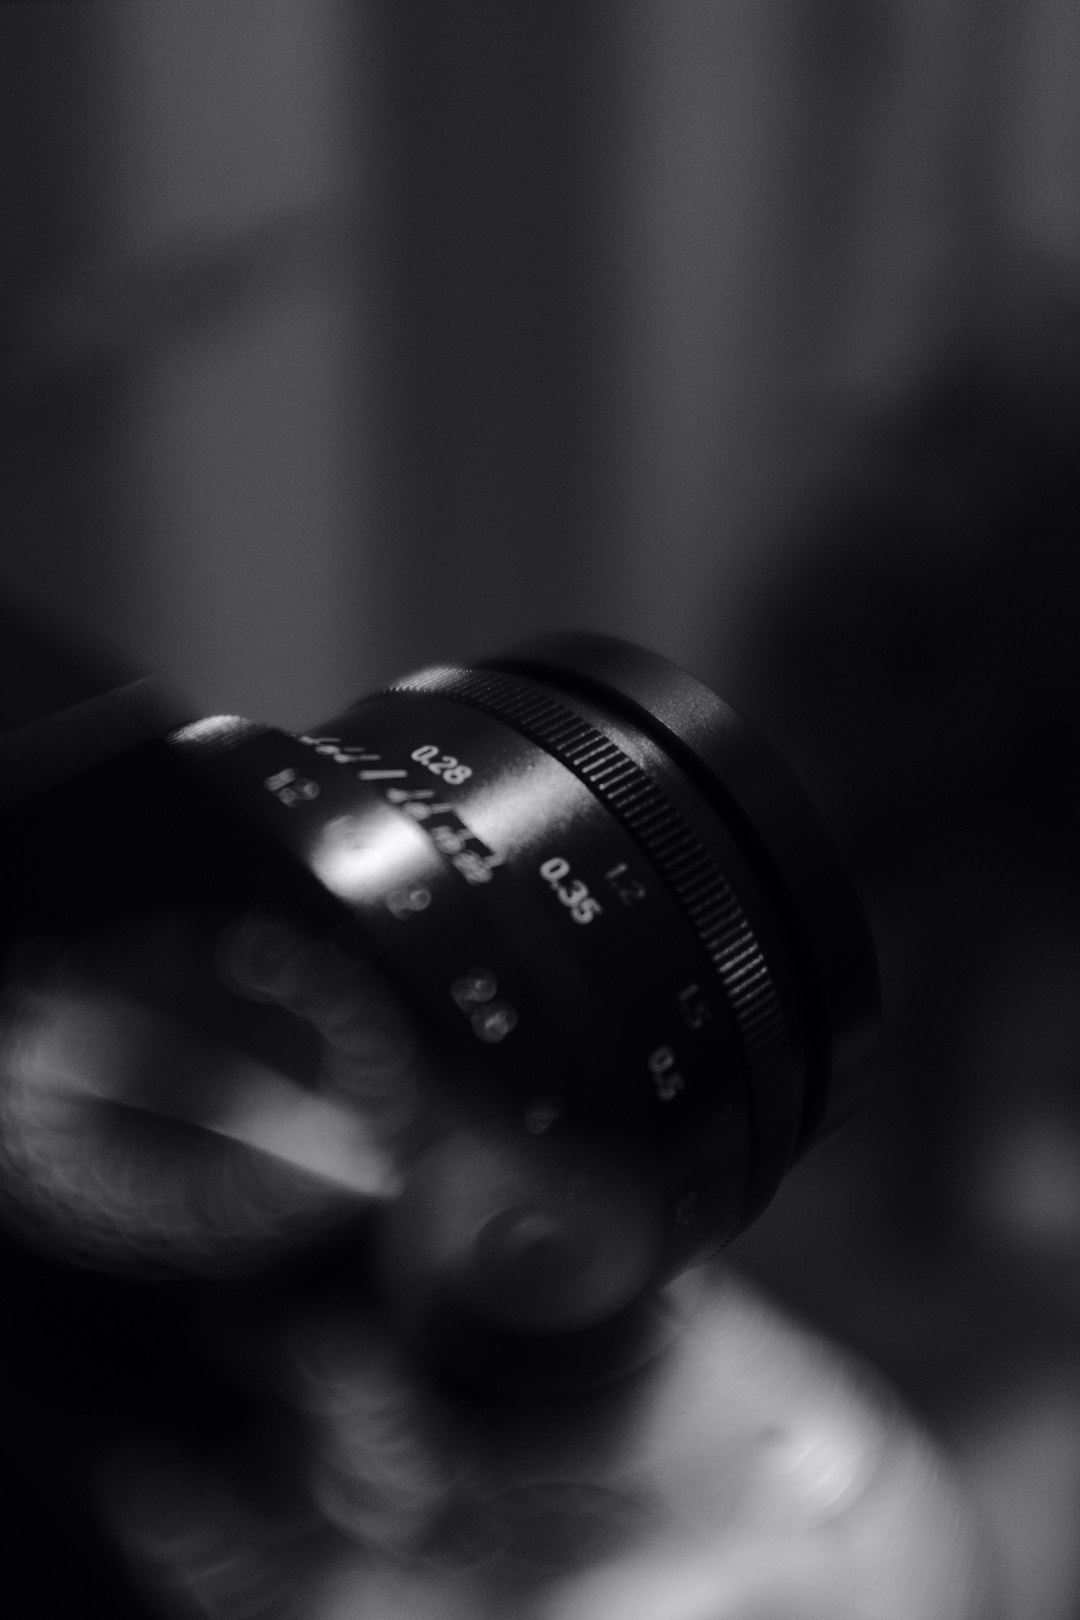 black camera lens in grayscale photography